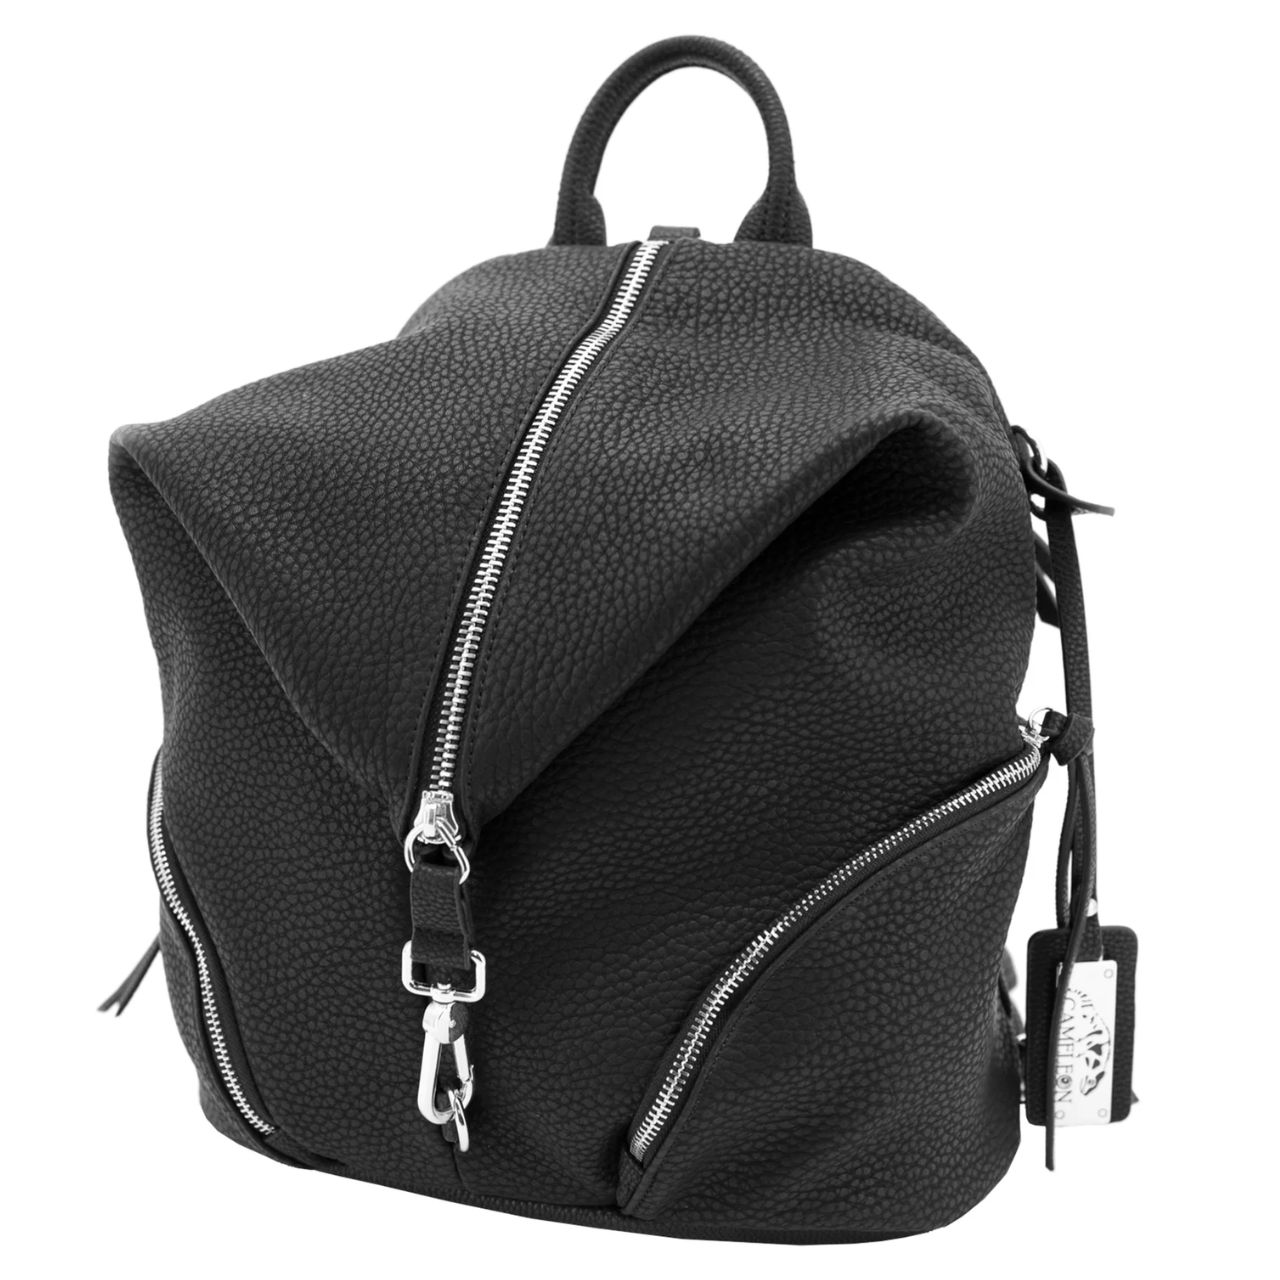 Angled view of Cameleon "Aurora" cblack, teardrop-shaped concealed carry backpack